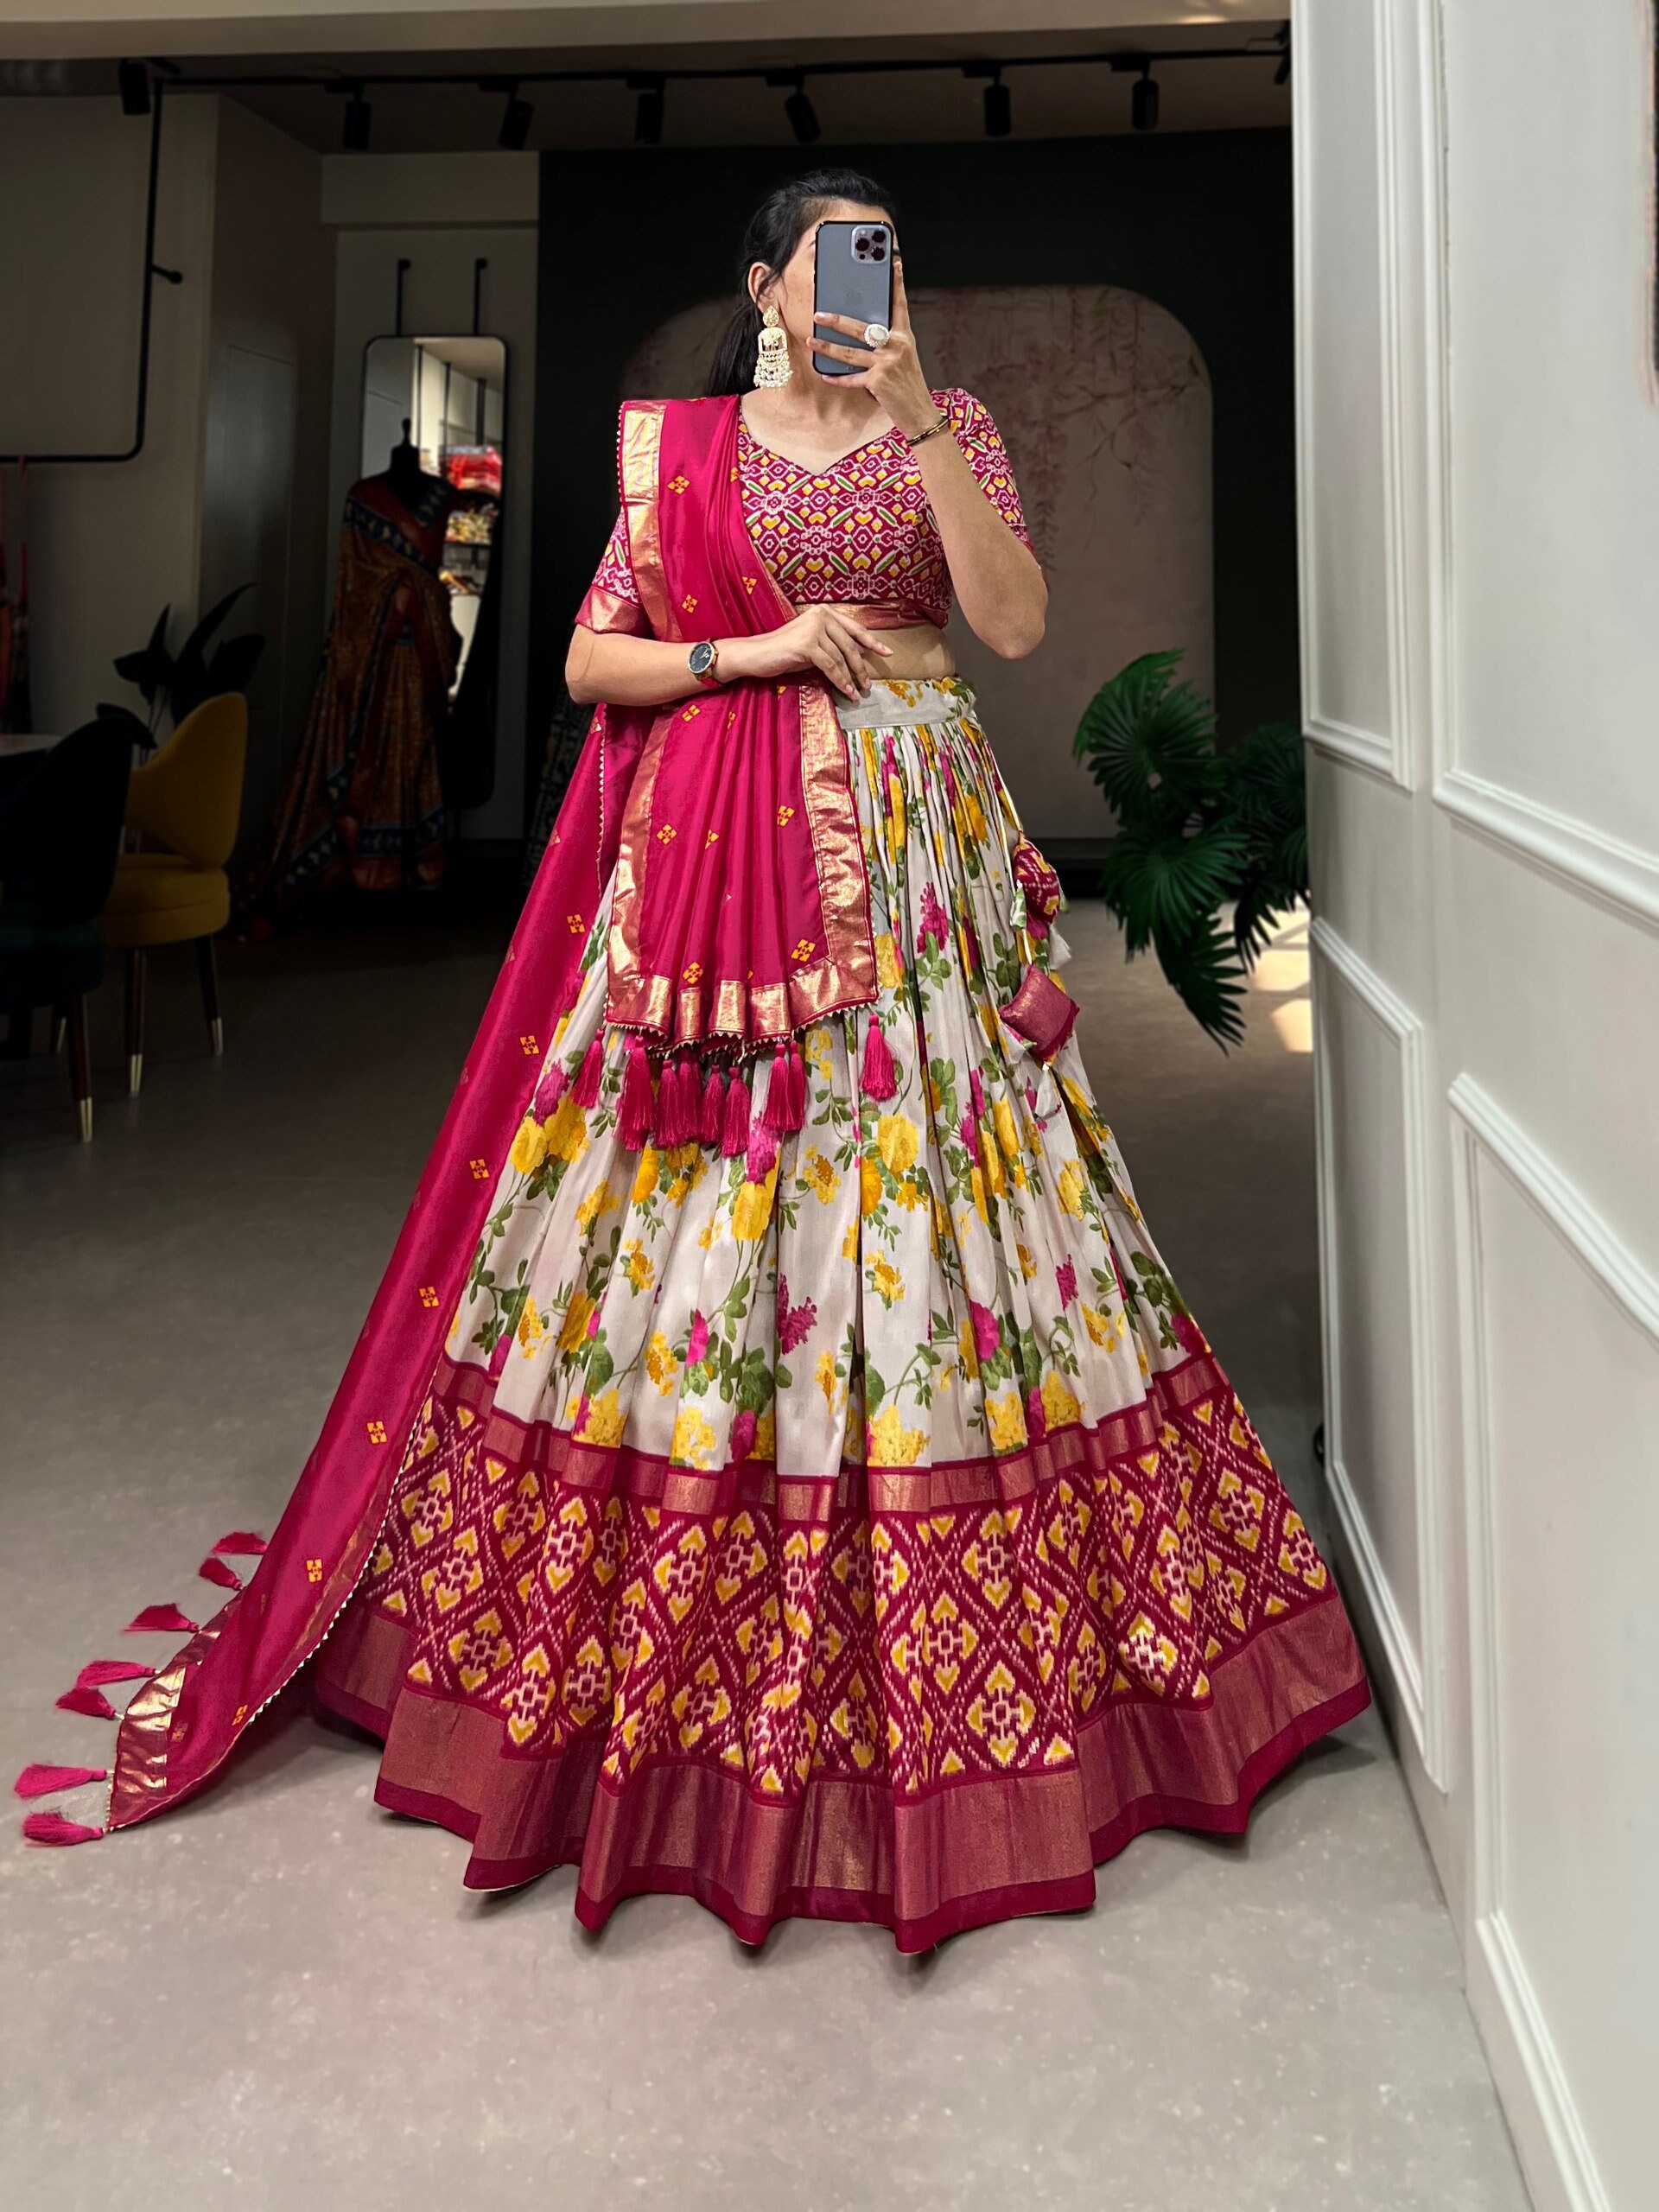 Bridal lehenga paired with peach color heavily embellished choli